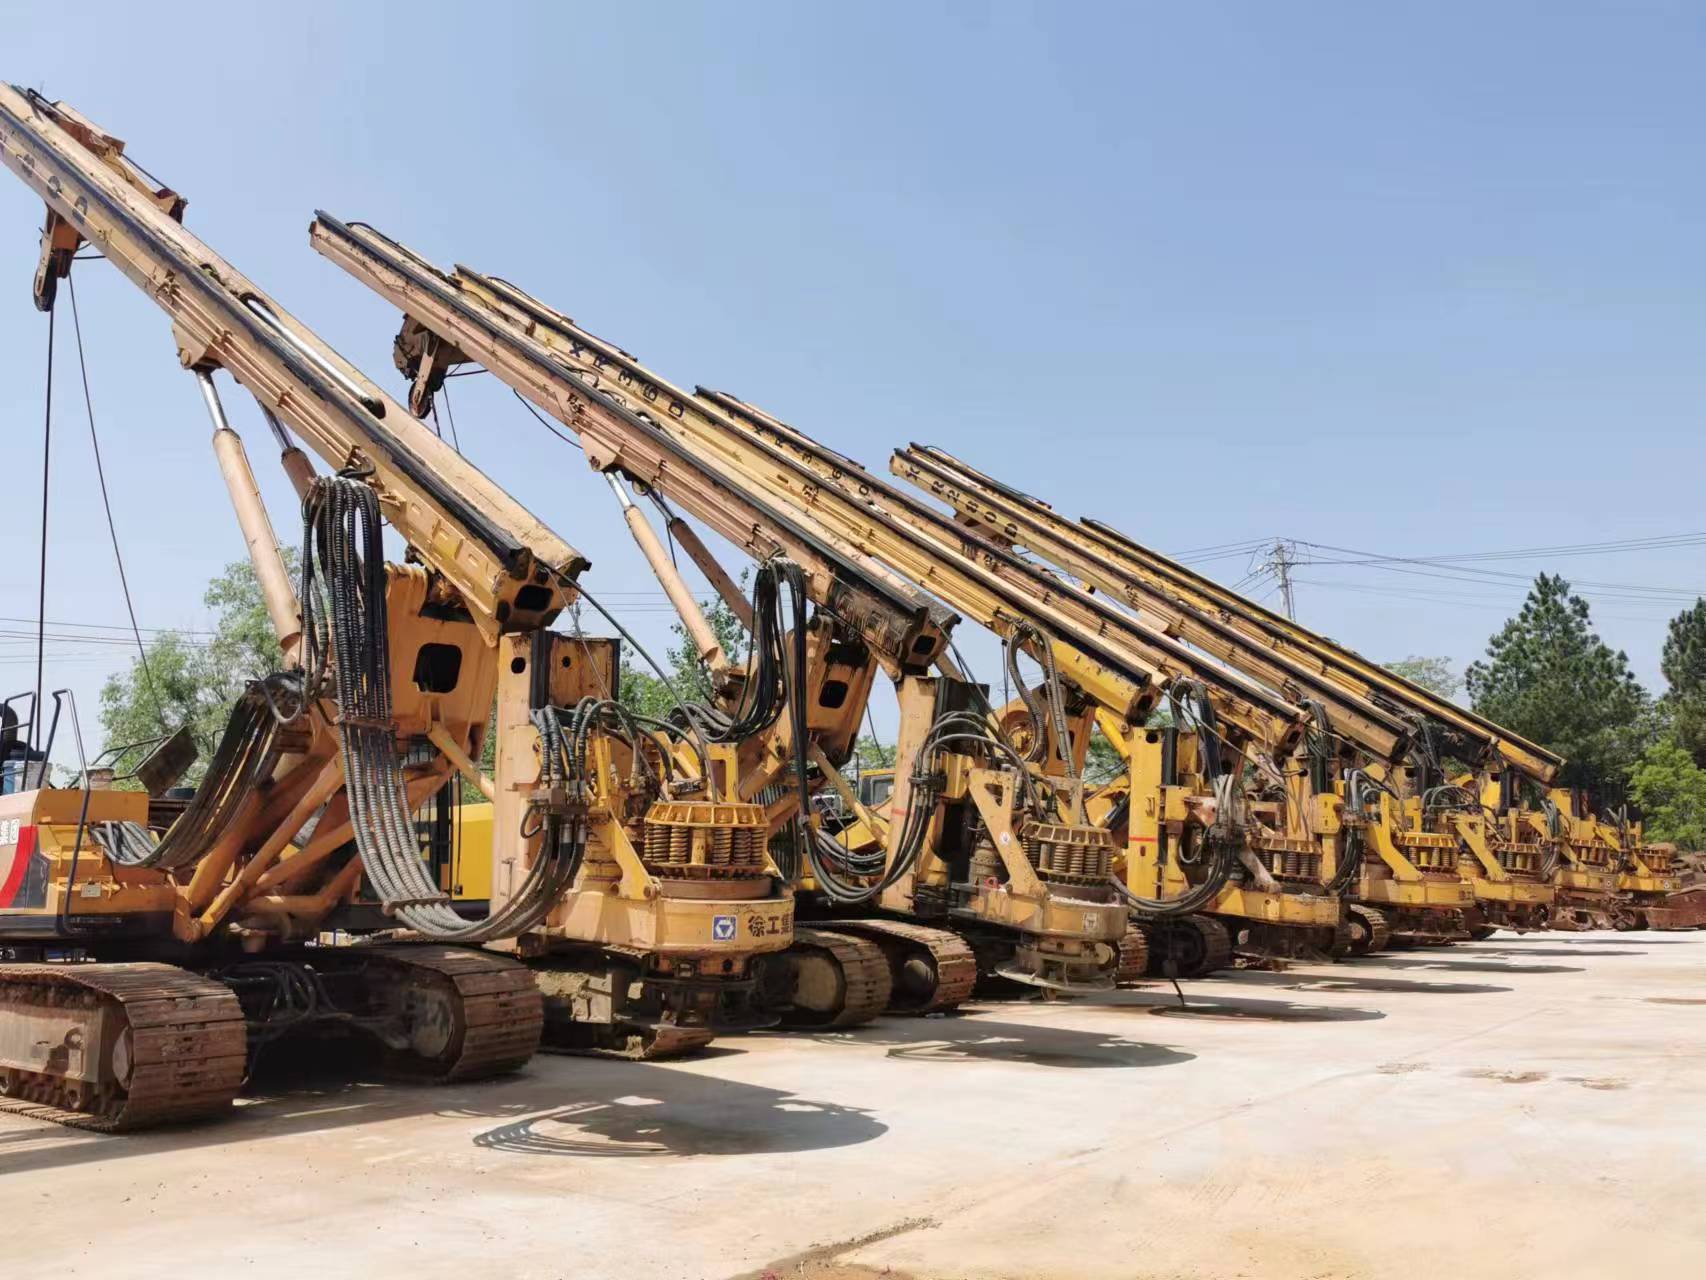 The Ultimate Guide: What Is a Rotary Drilling Rig and What Is It Used For